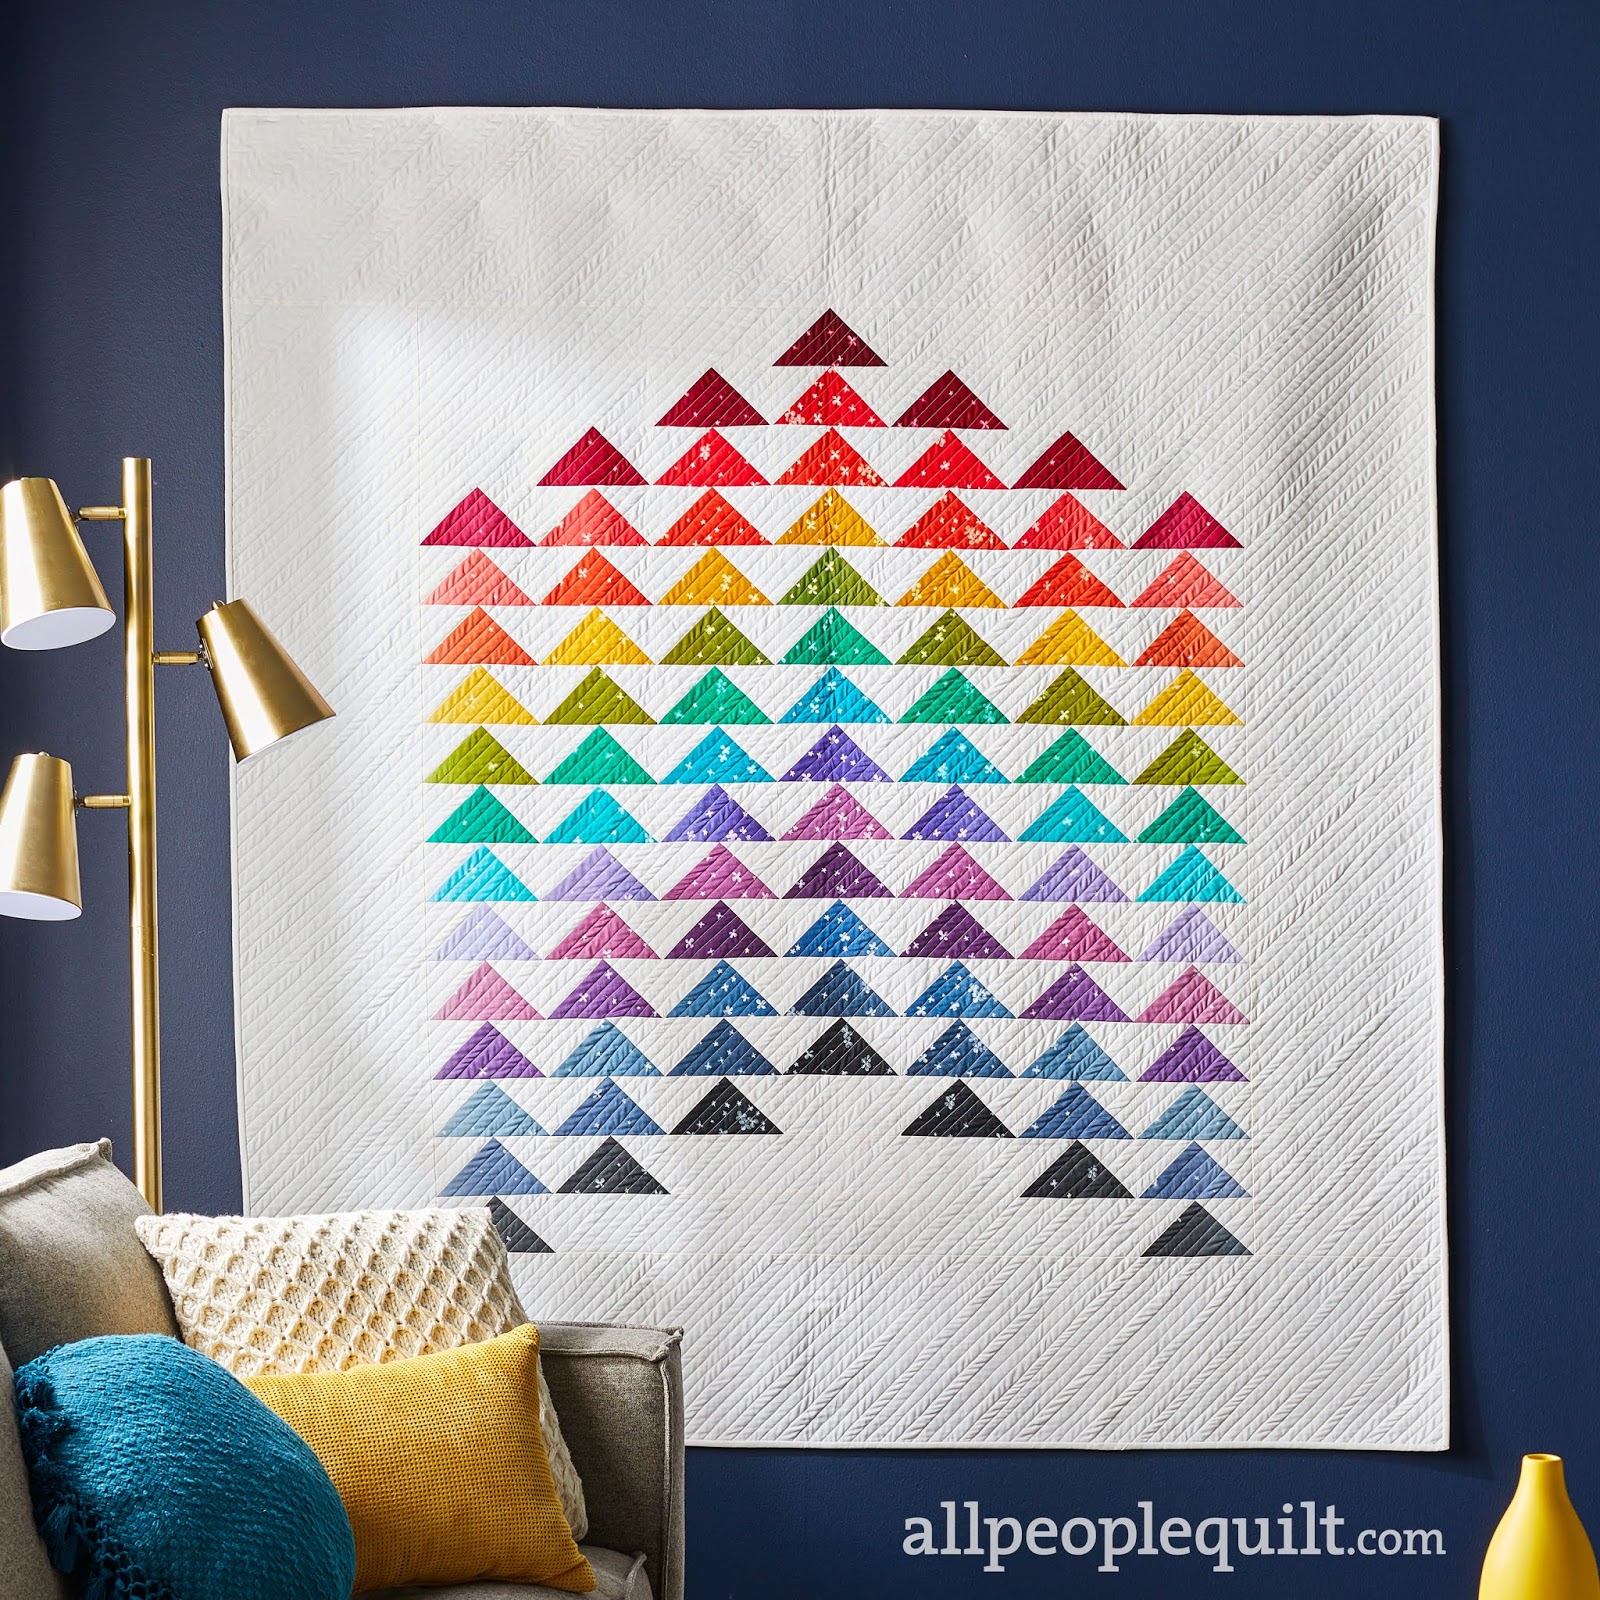 Make A Design Wall You Can Use Your Hera Marker Against – Quilting Jetgirl